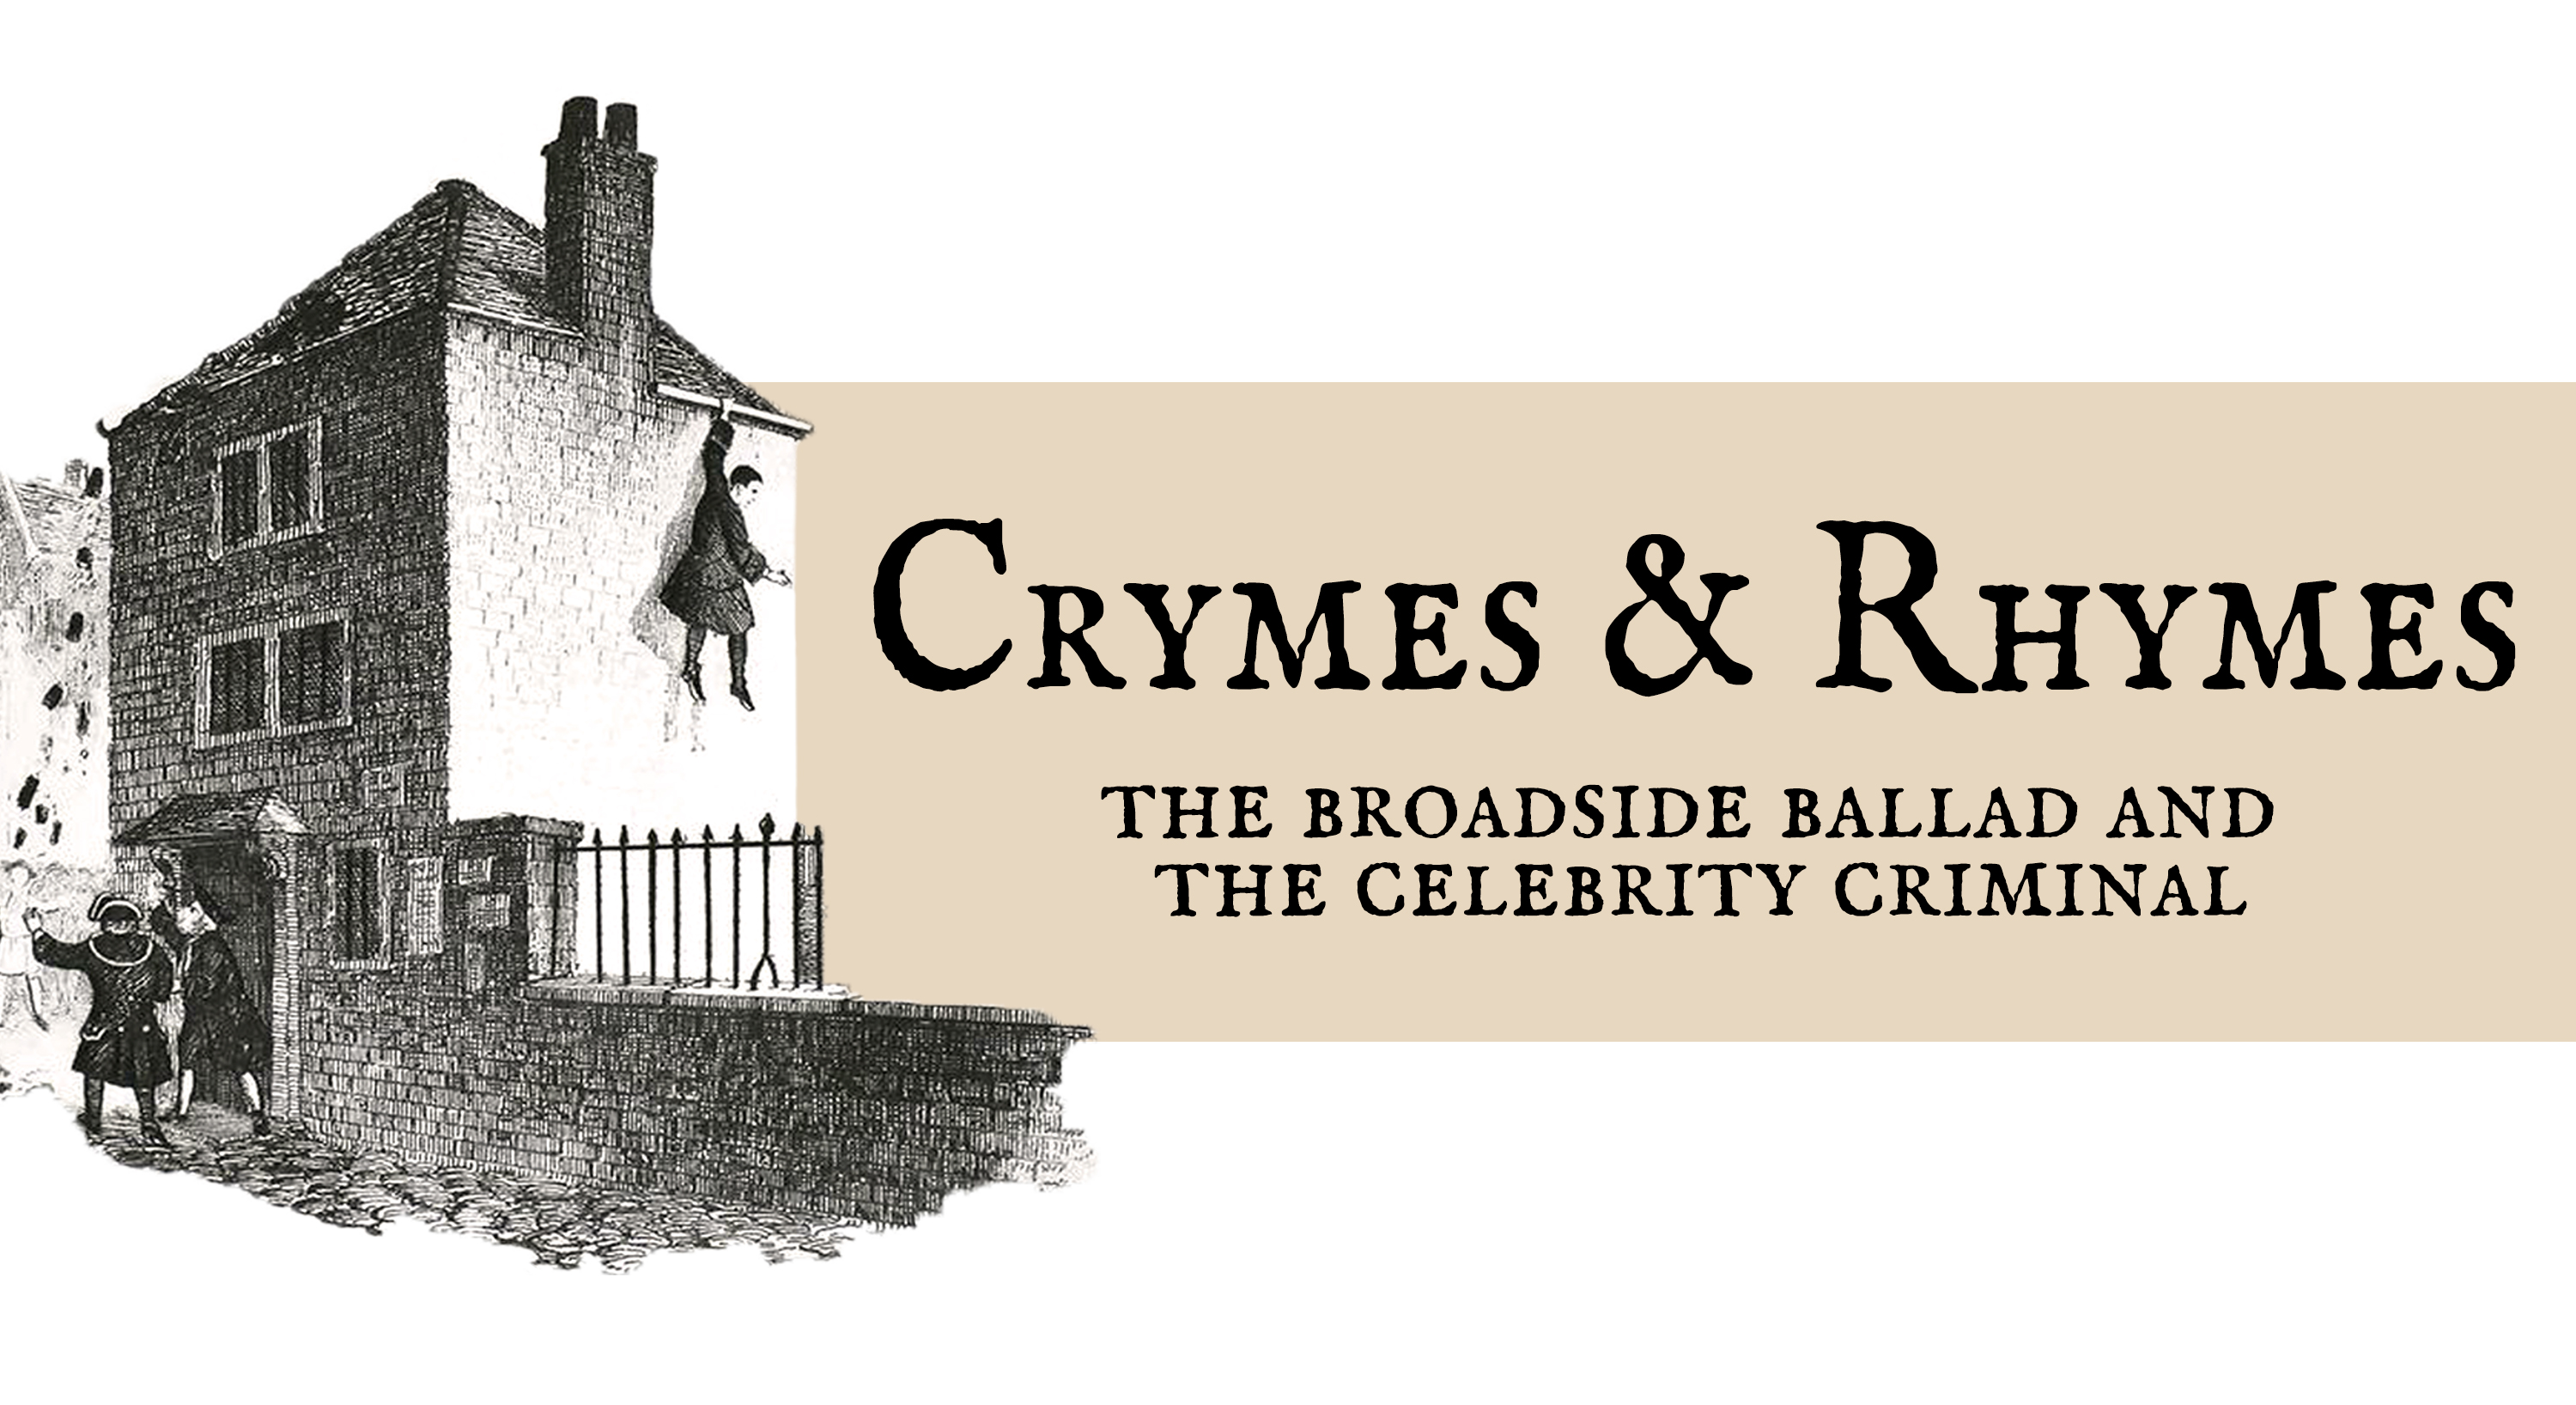 Crymes and Rhymes: The Broadside Ballad and the Celebrity Criminal